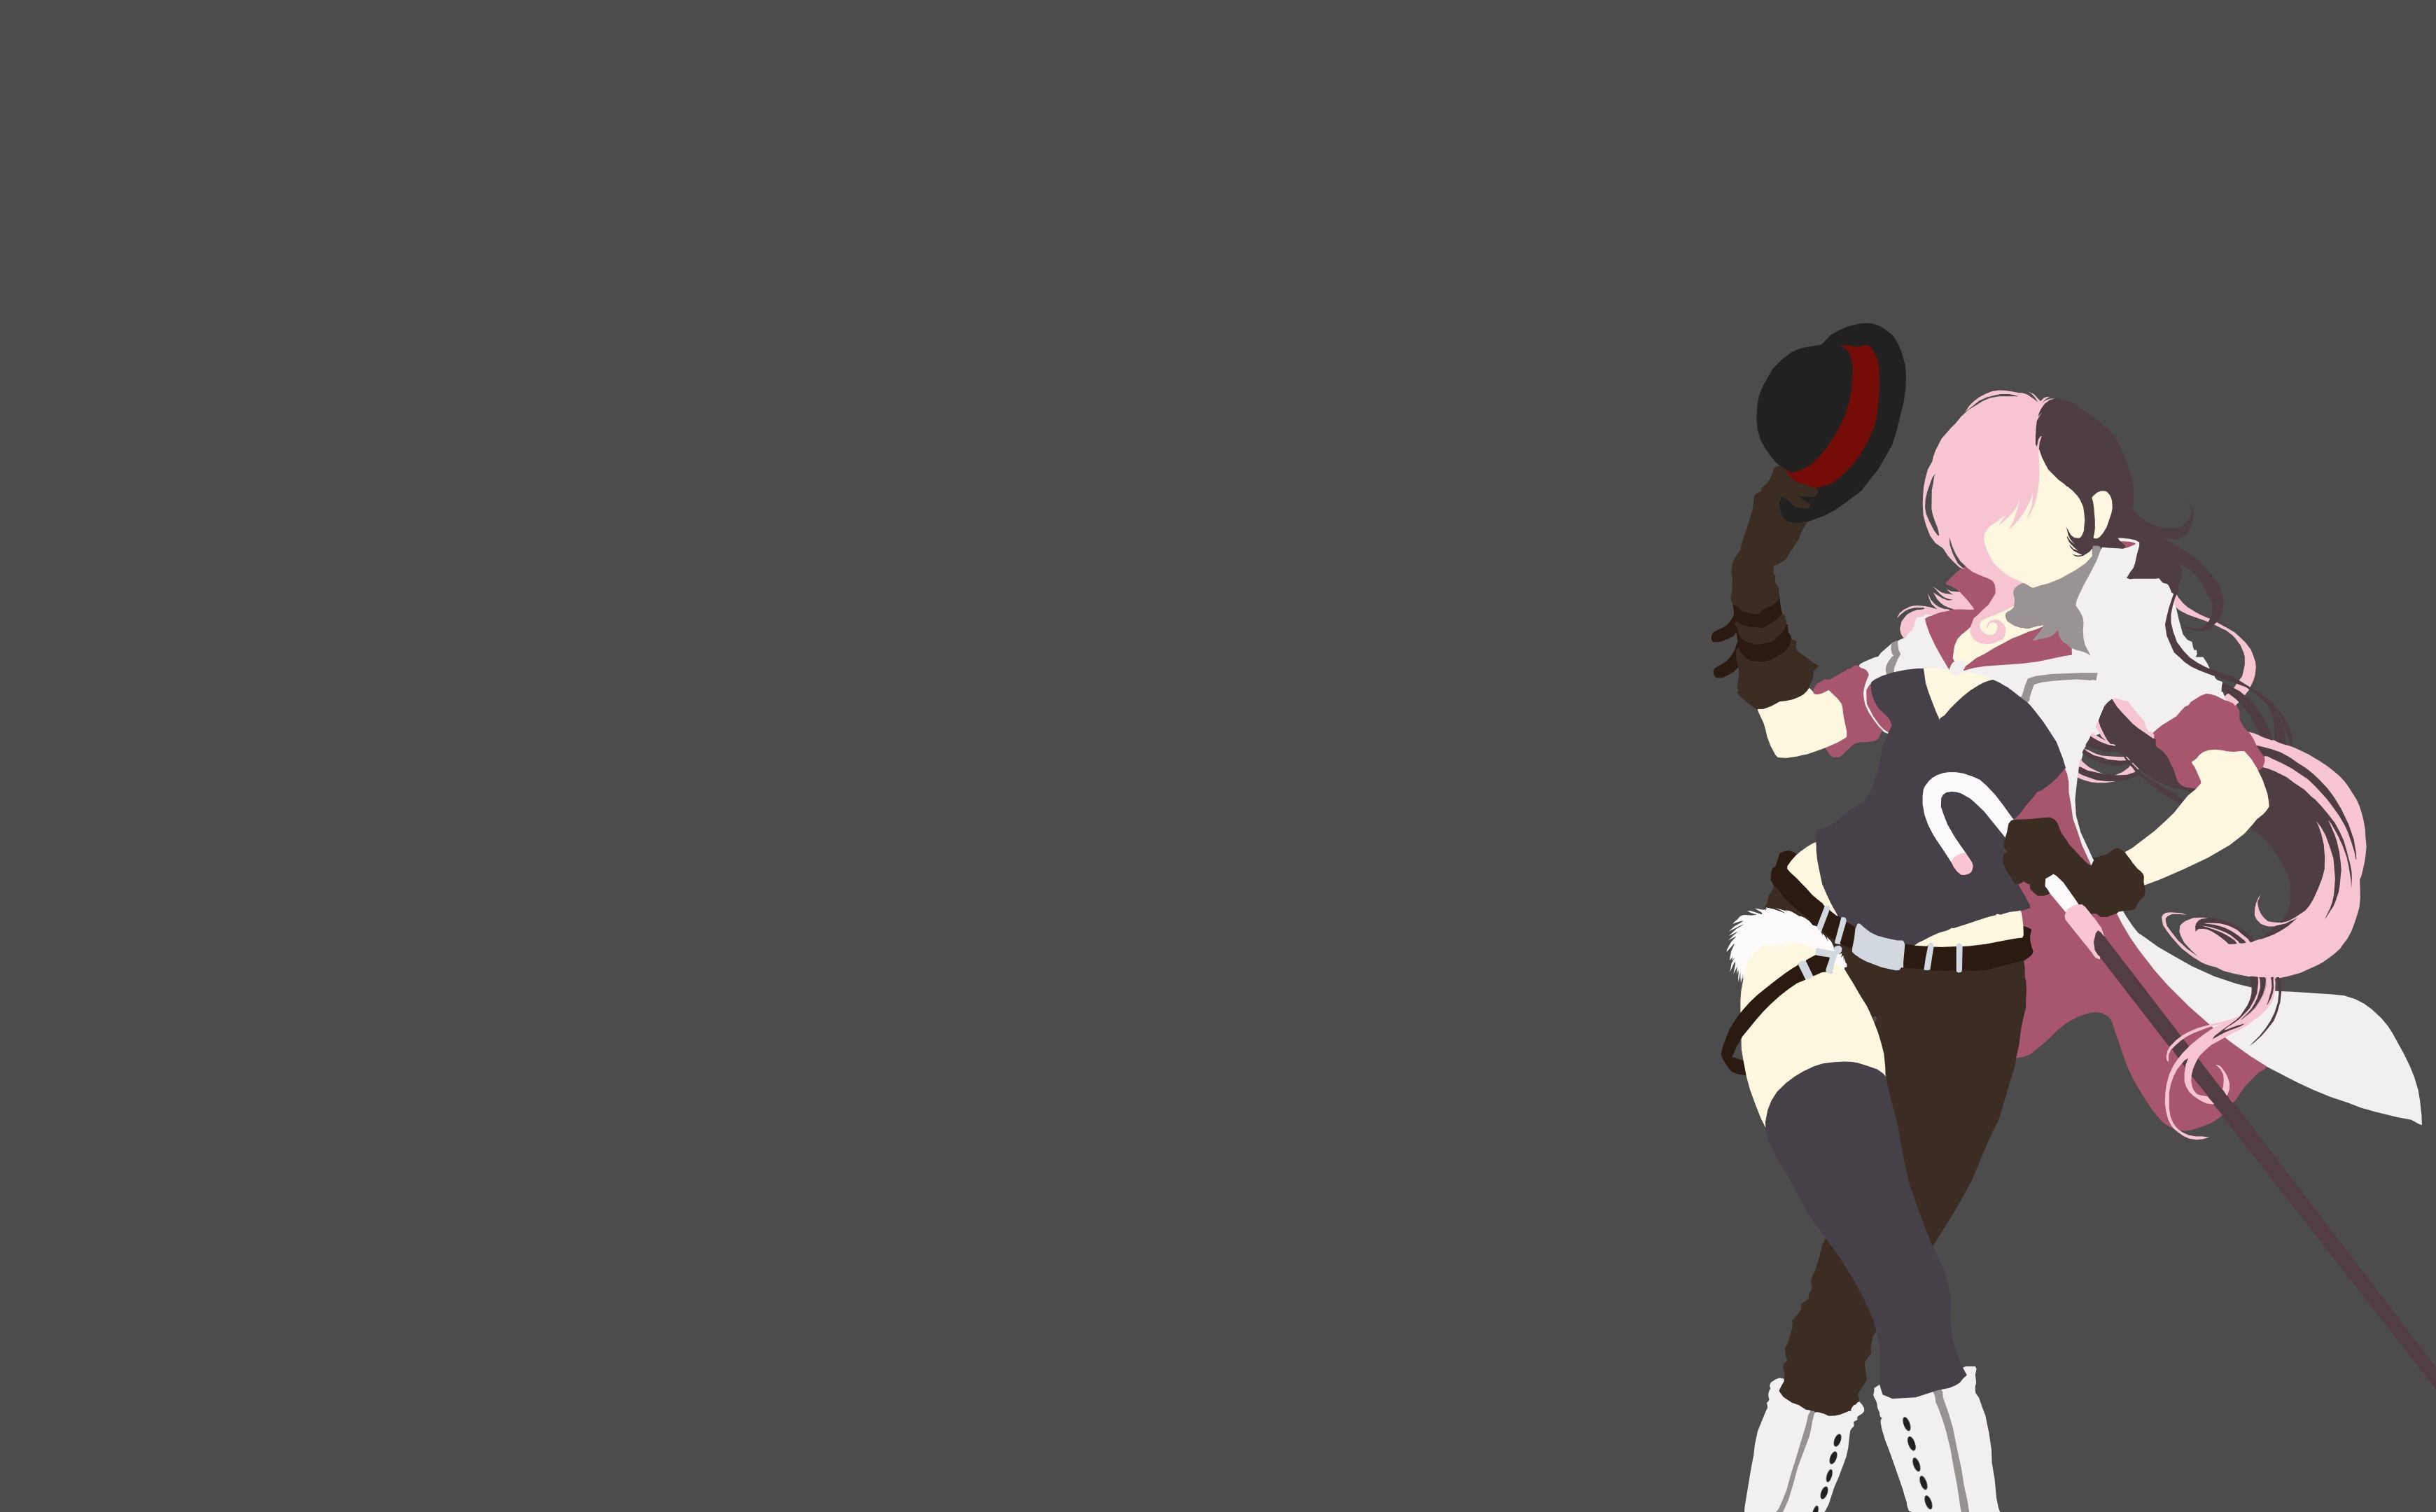 Rwby Neo Wallpapers Best Of 5537 Best Minimalist Image On Pholder This Year...